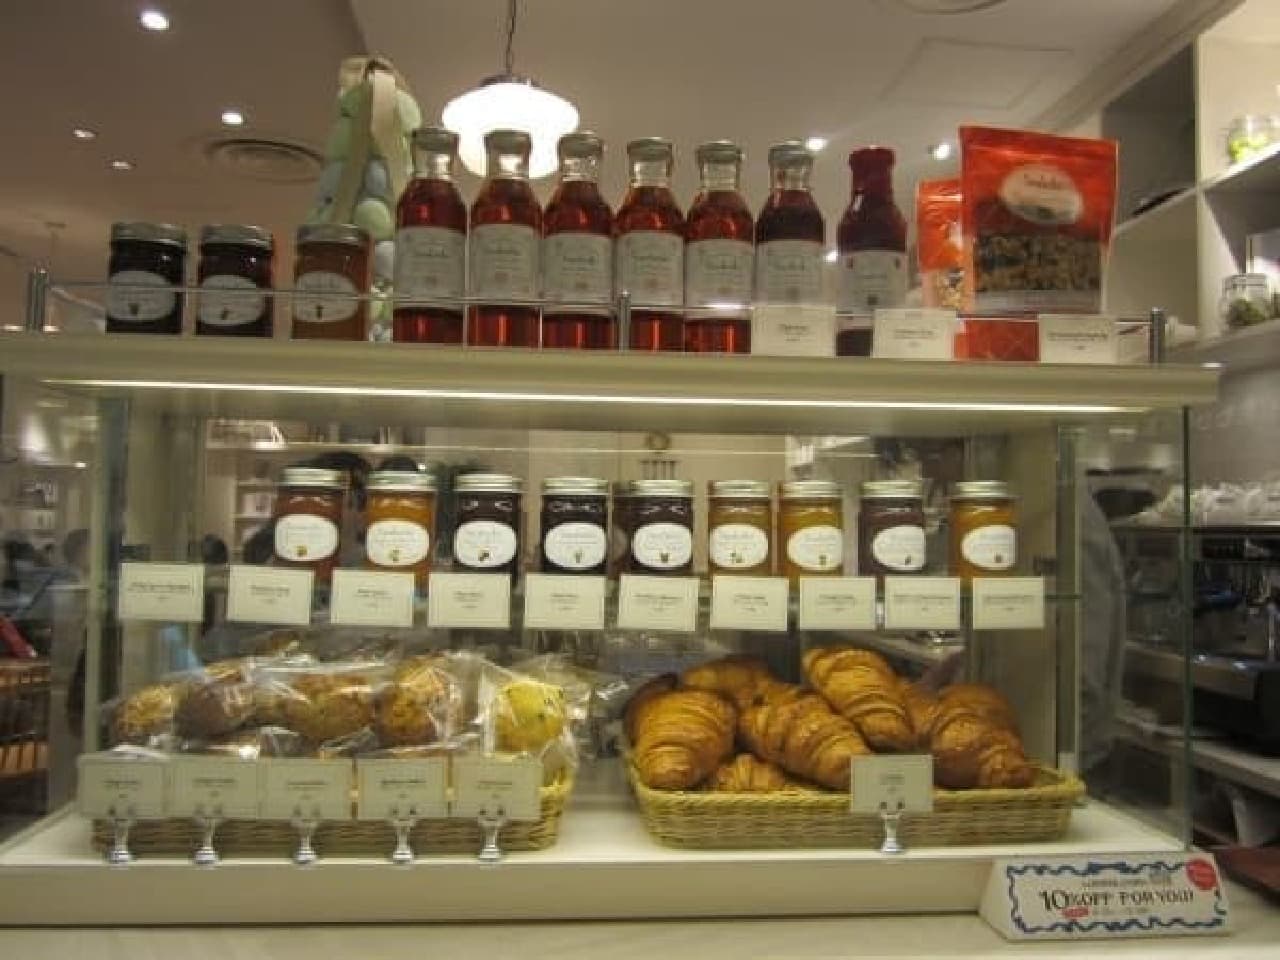 "Fruit spread" is also a specialty of "Sarabes"